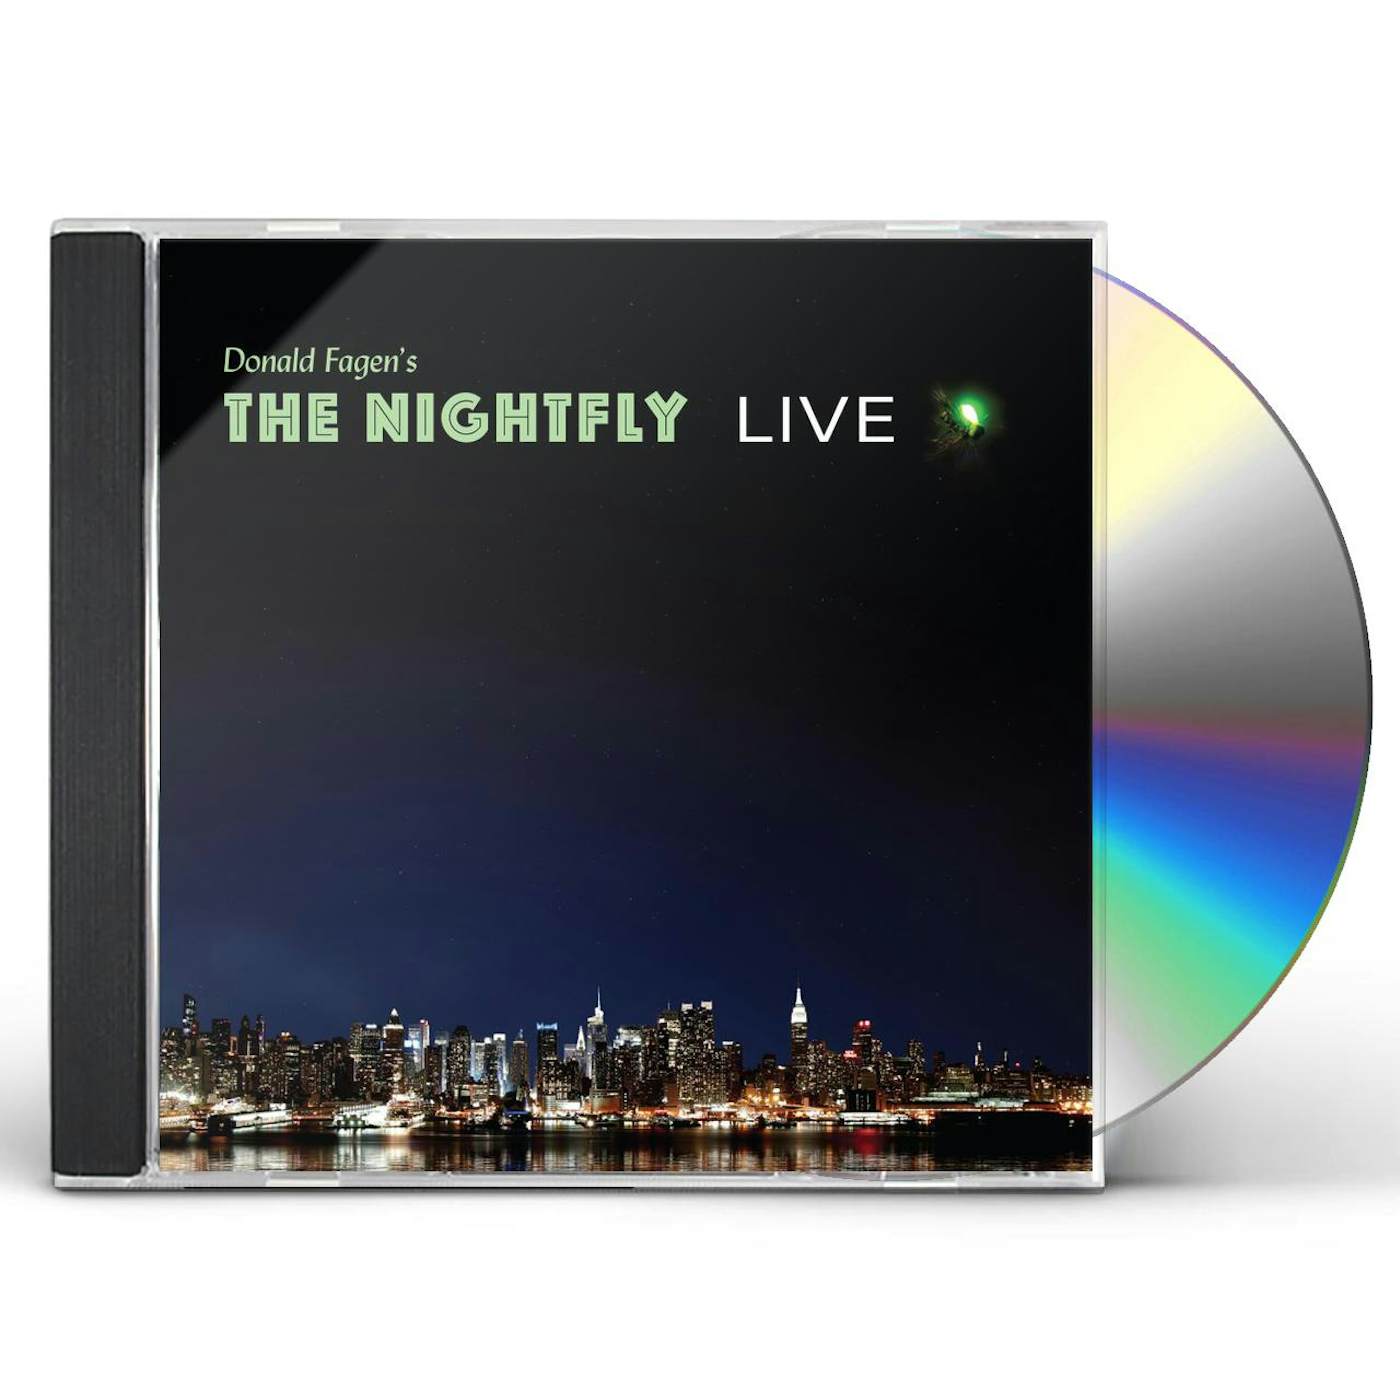 DONALD FAGEN'S THE NIGHTFLY LIVE CD